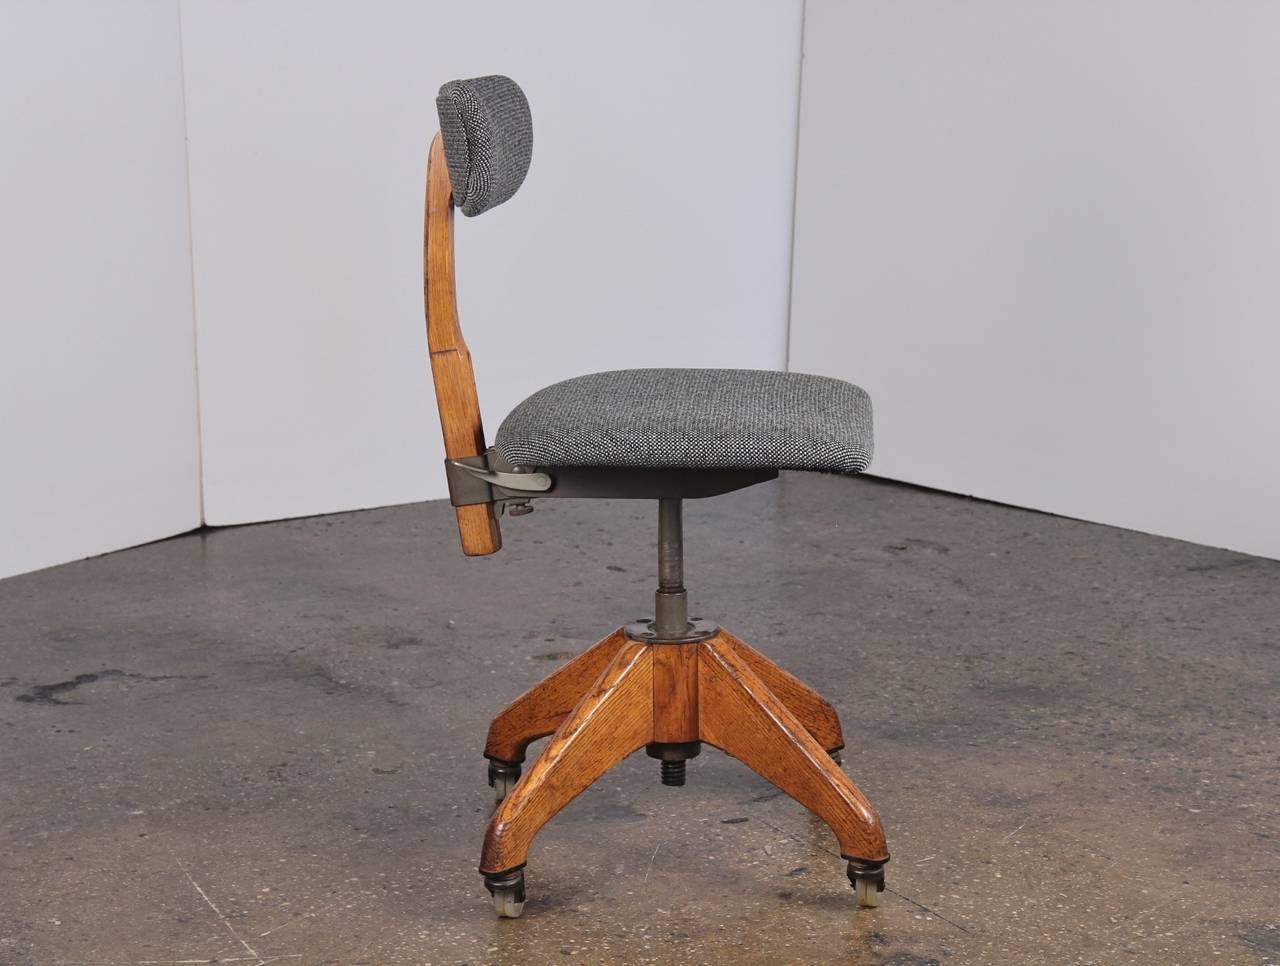 Charming Scandinavian task chair in beautifully patinated white oak. The seat and back rest are adjustable. All wheels roll smoothly. Newly upholstered in a textural mid-century fabric. Made in Sweden. 1950s-1960s.

16